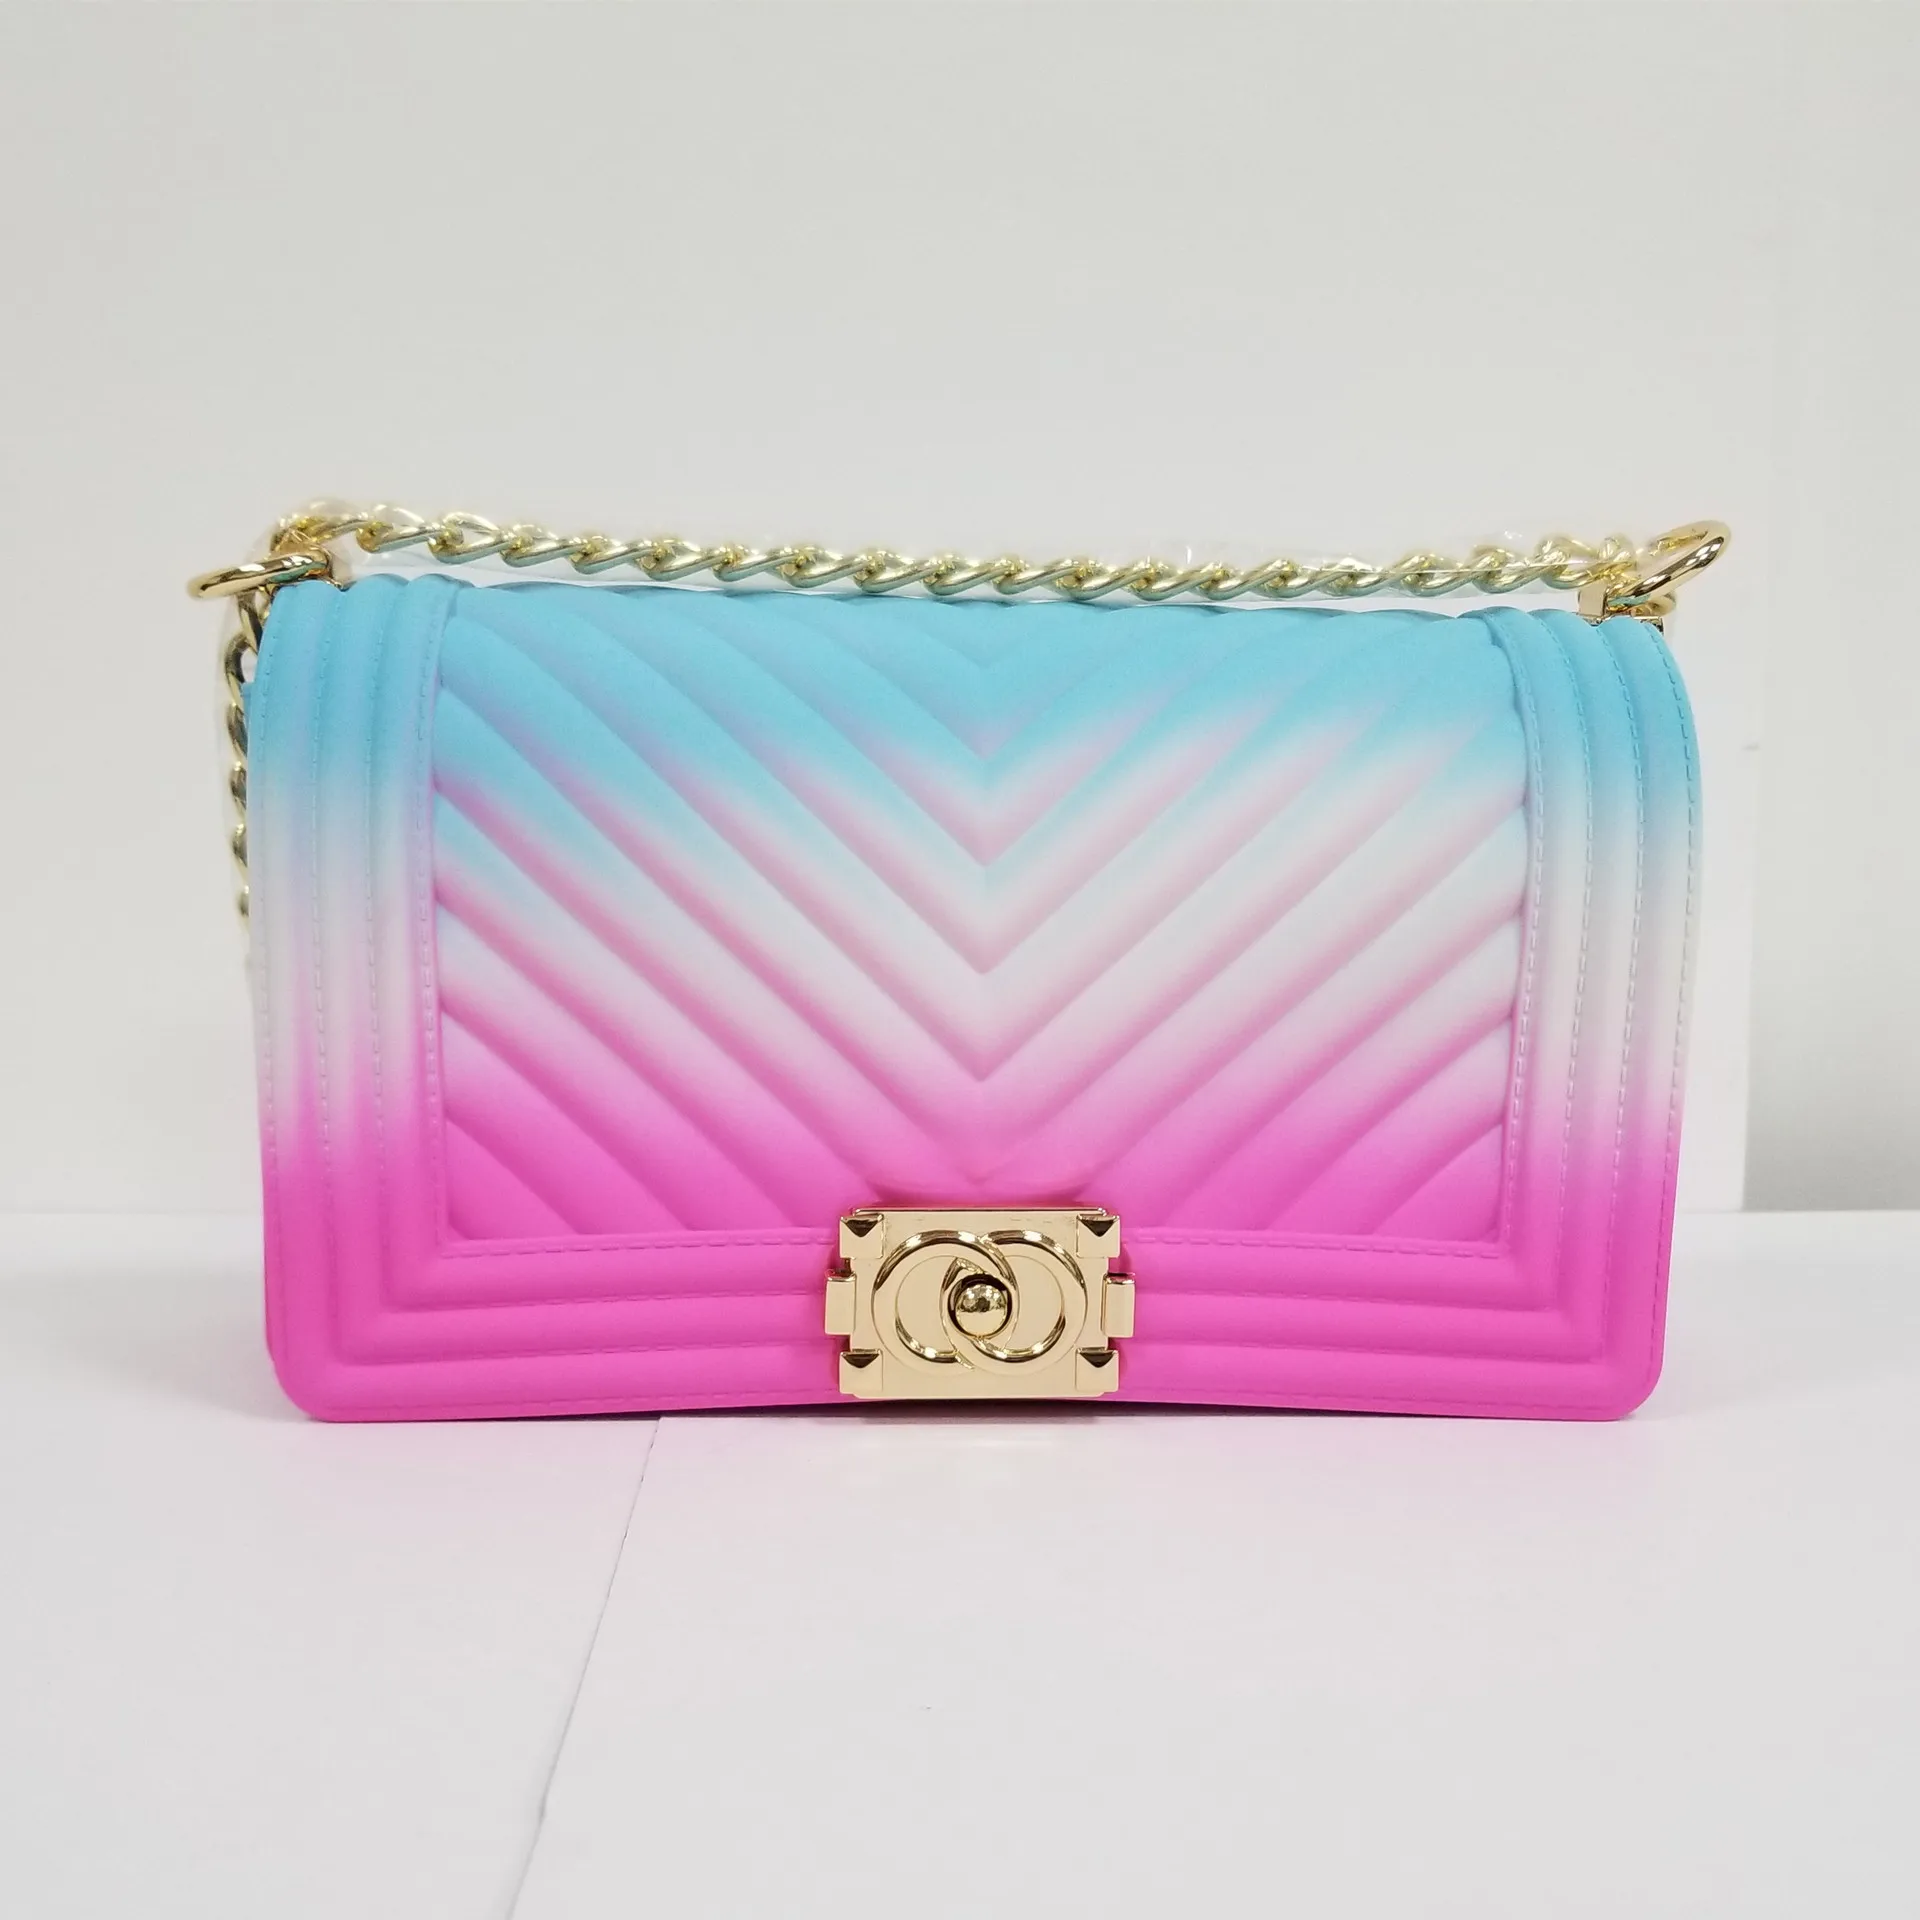 

2020 new fashion lady personality colorful shoulder crossbody bag women rainbow pvc v shape jelly handbag purse, As the picture show